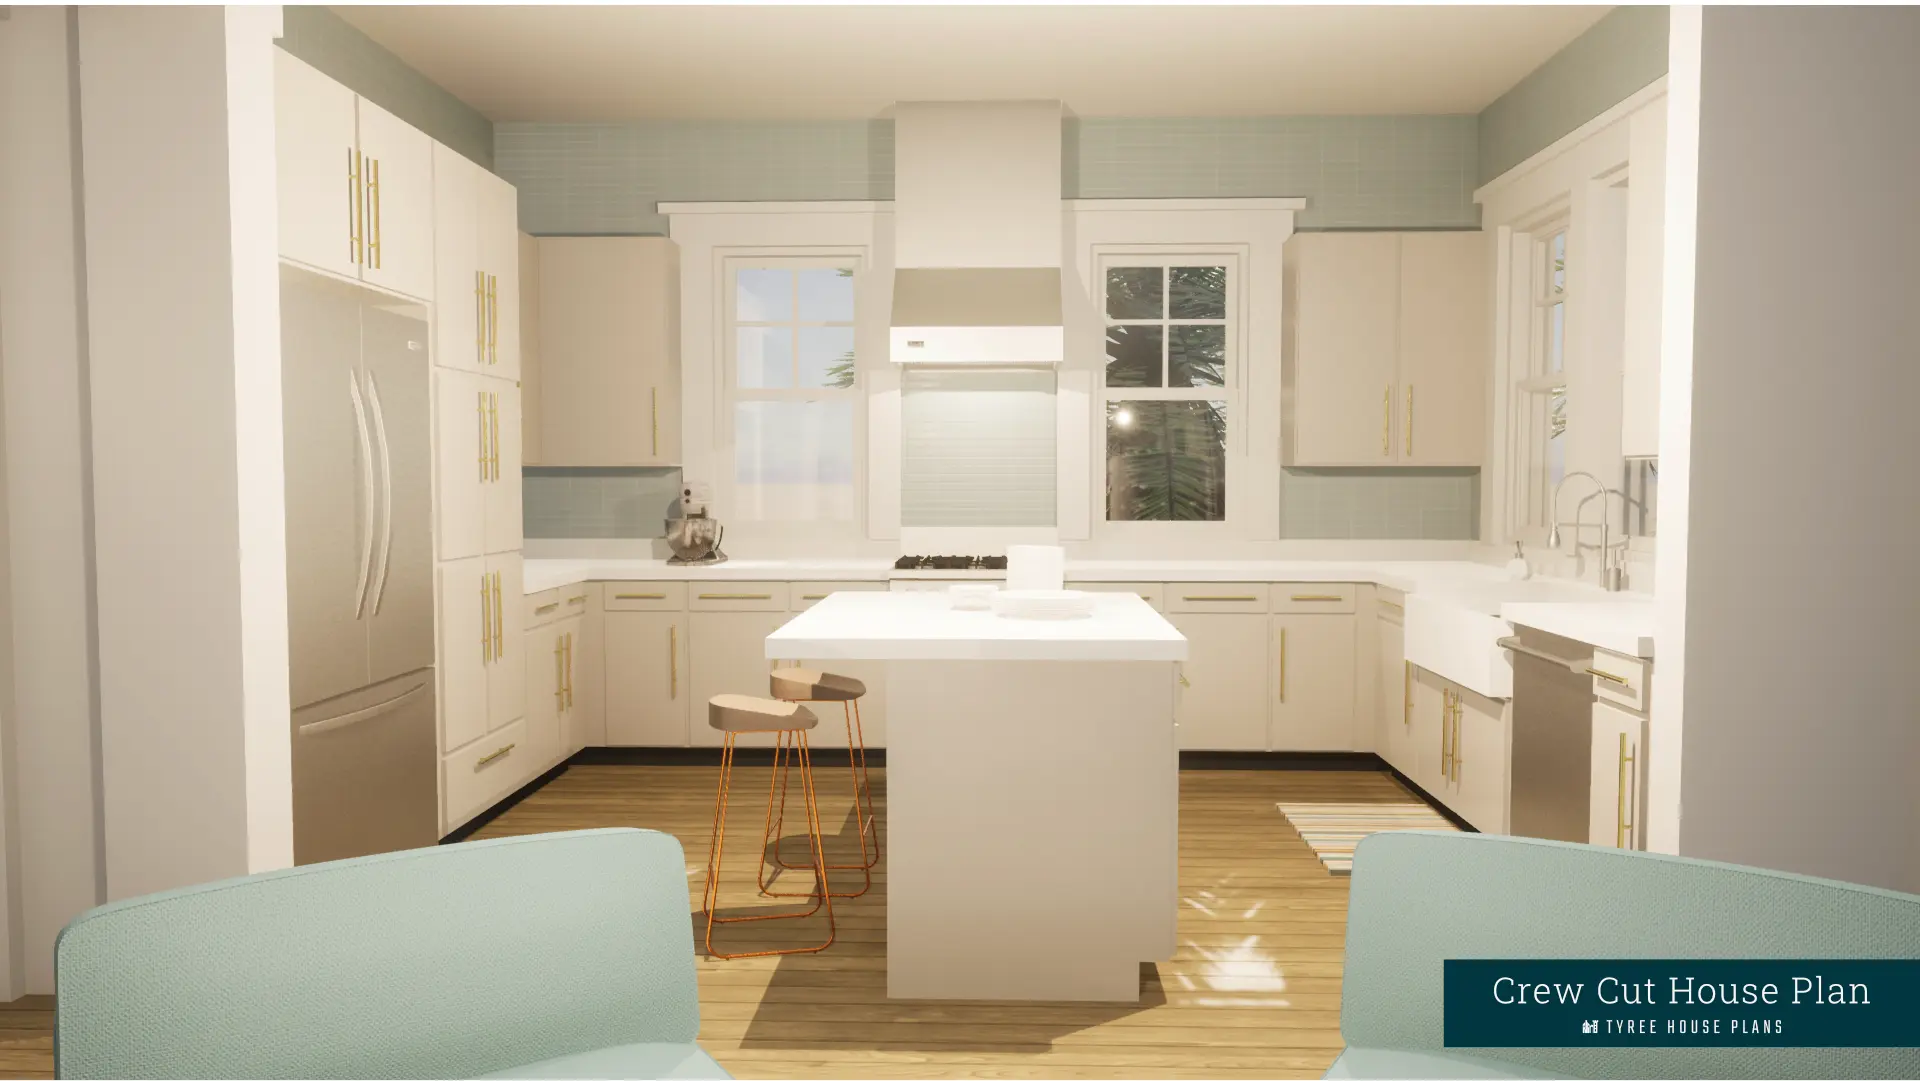 Kitchen - Crew Cut by Tyree House Plans